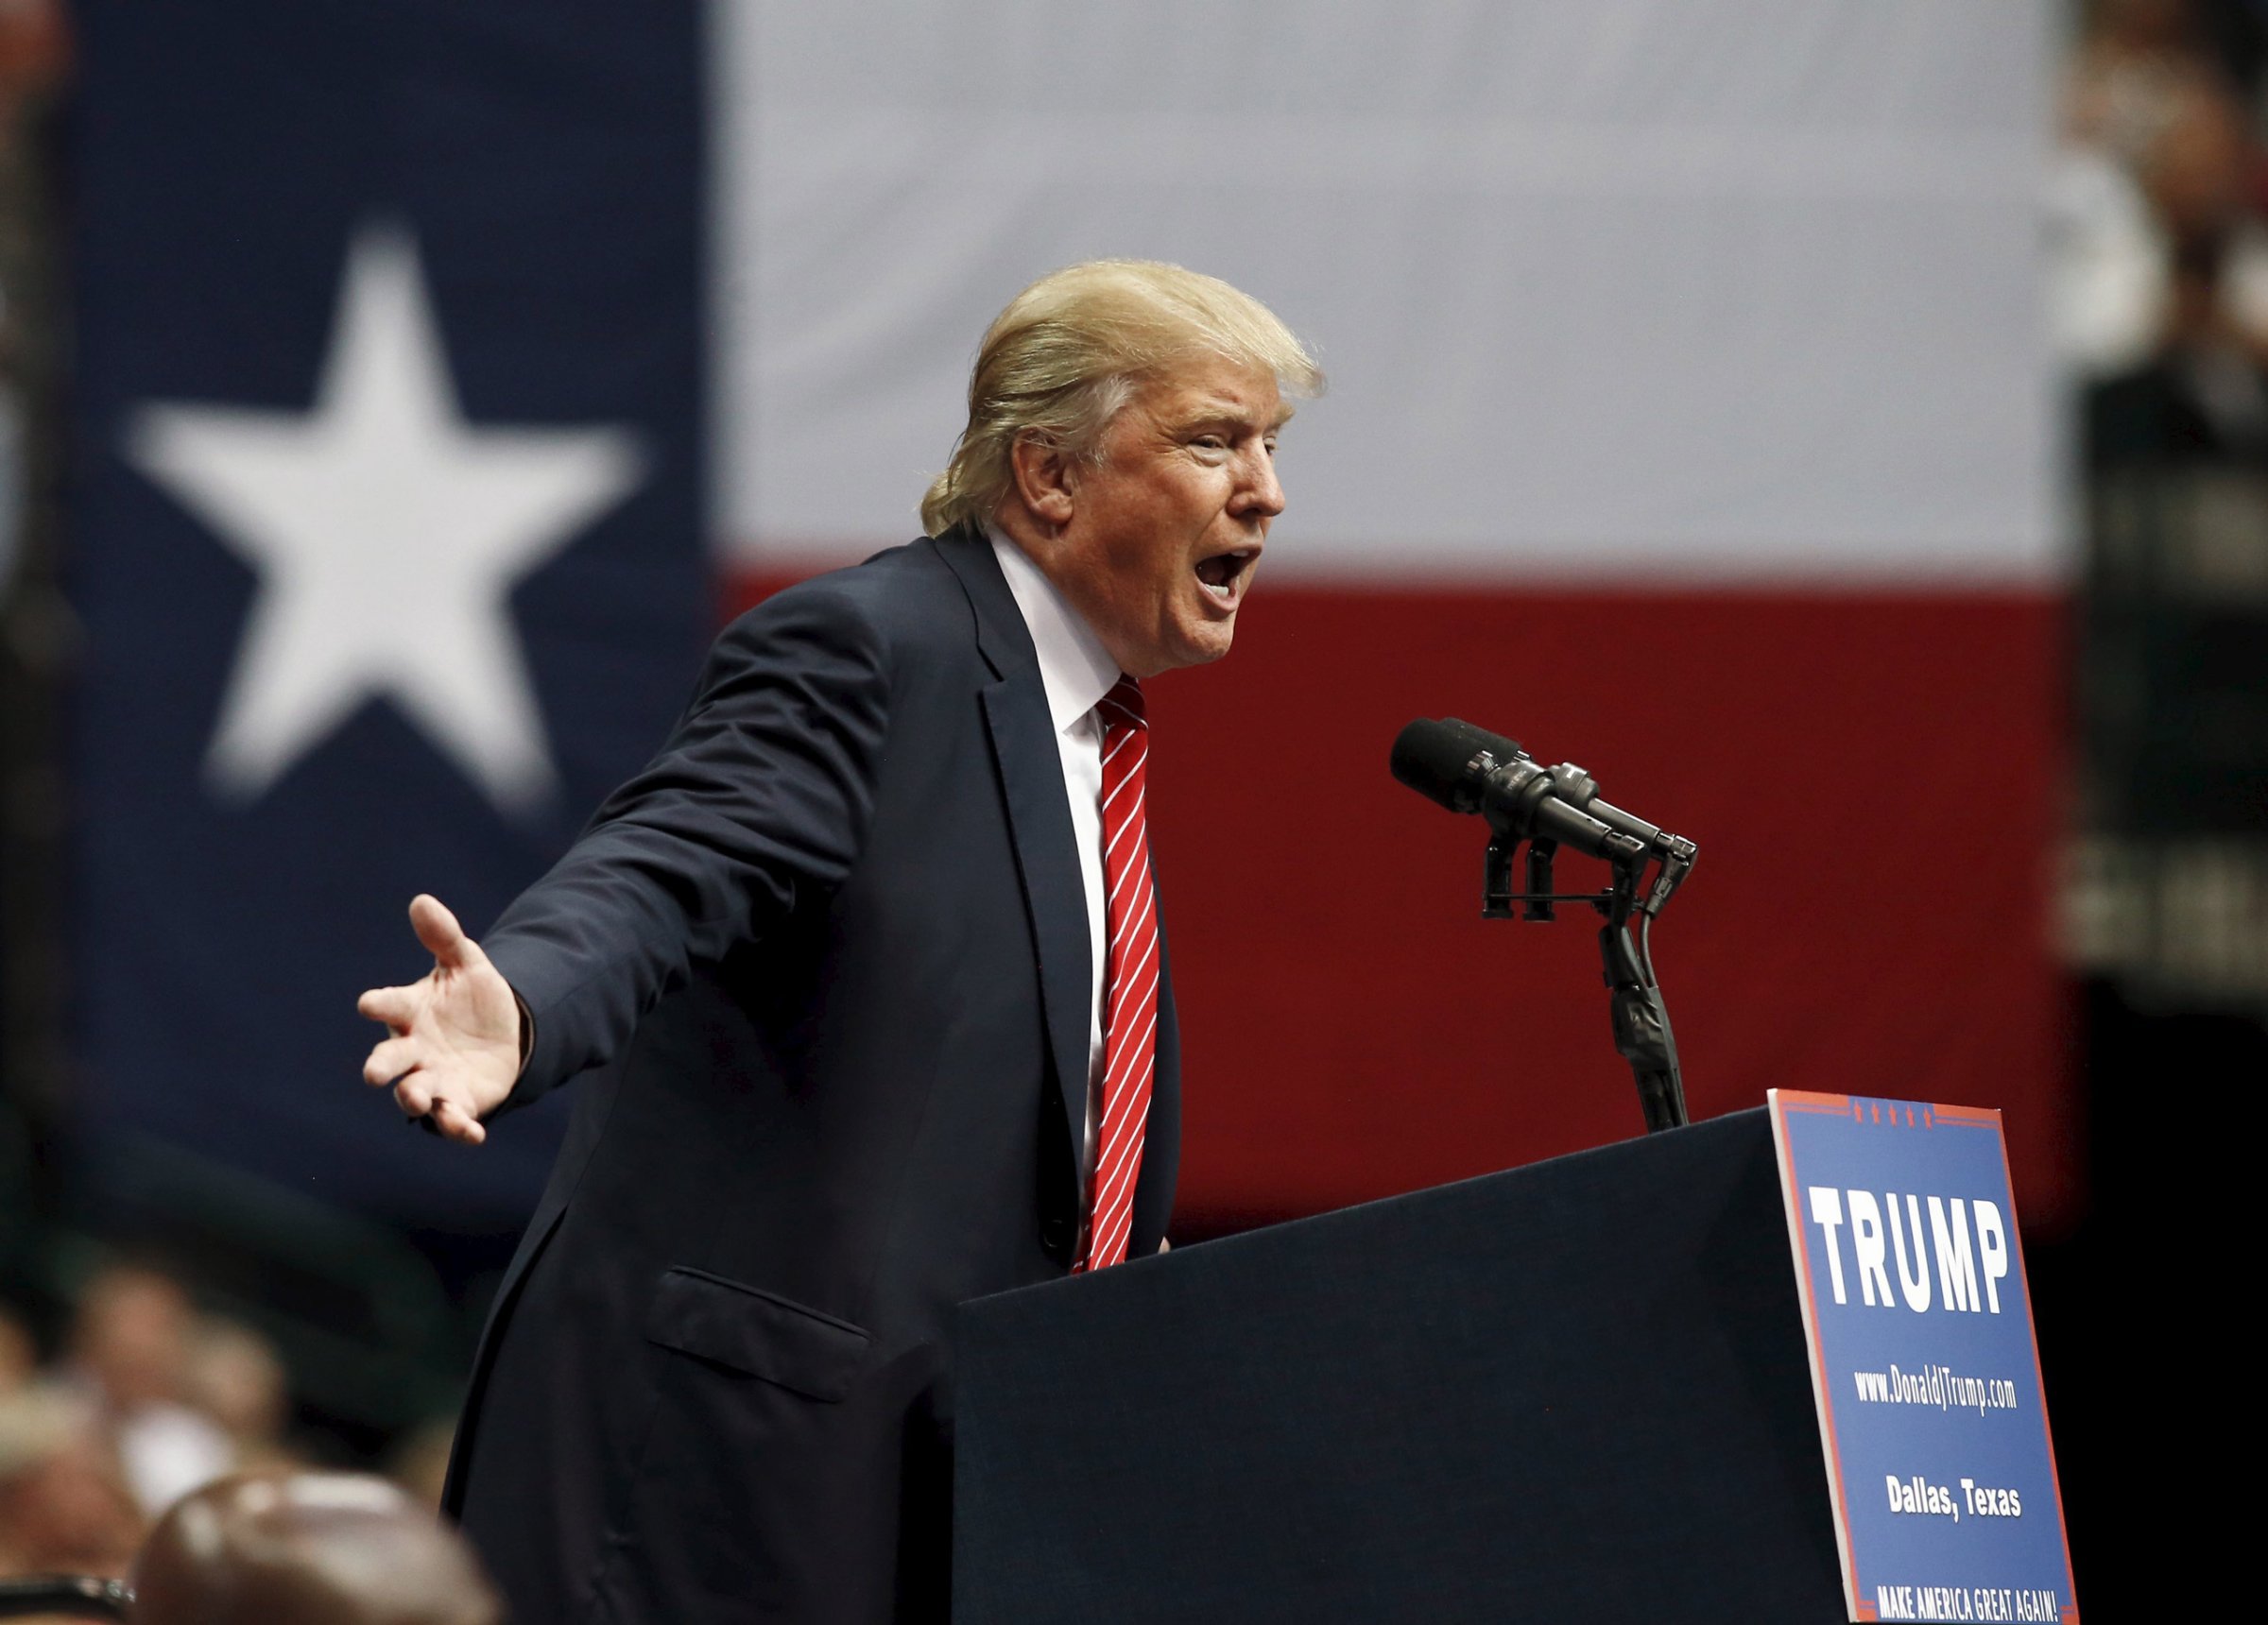 Republican presidential candidate Donald Trump speaks at a rally in Dallas, Texas